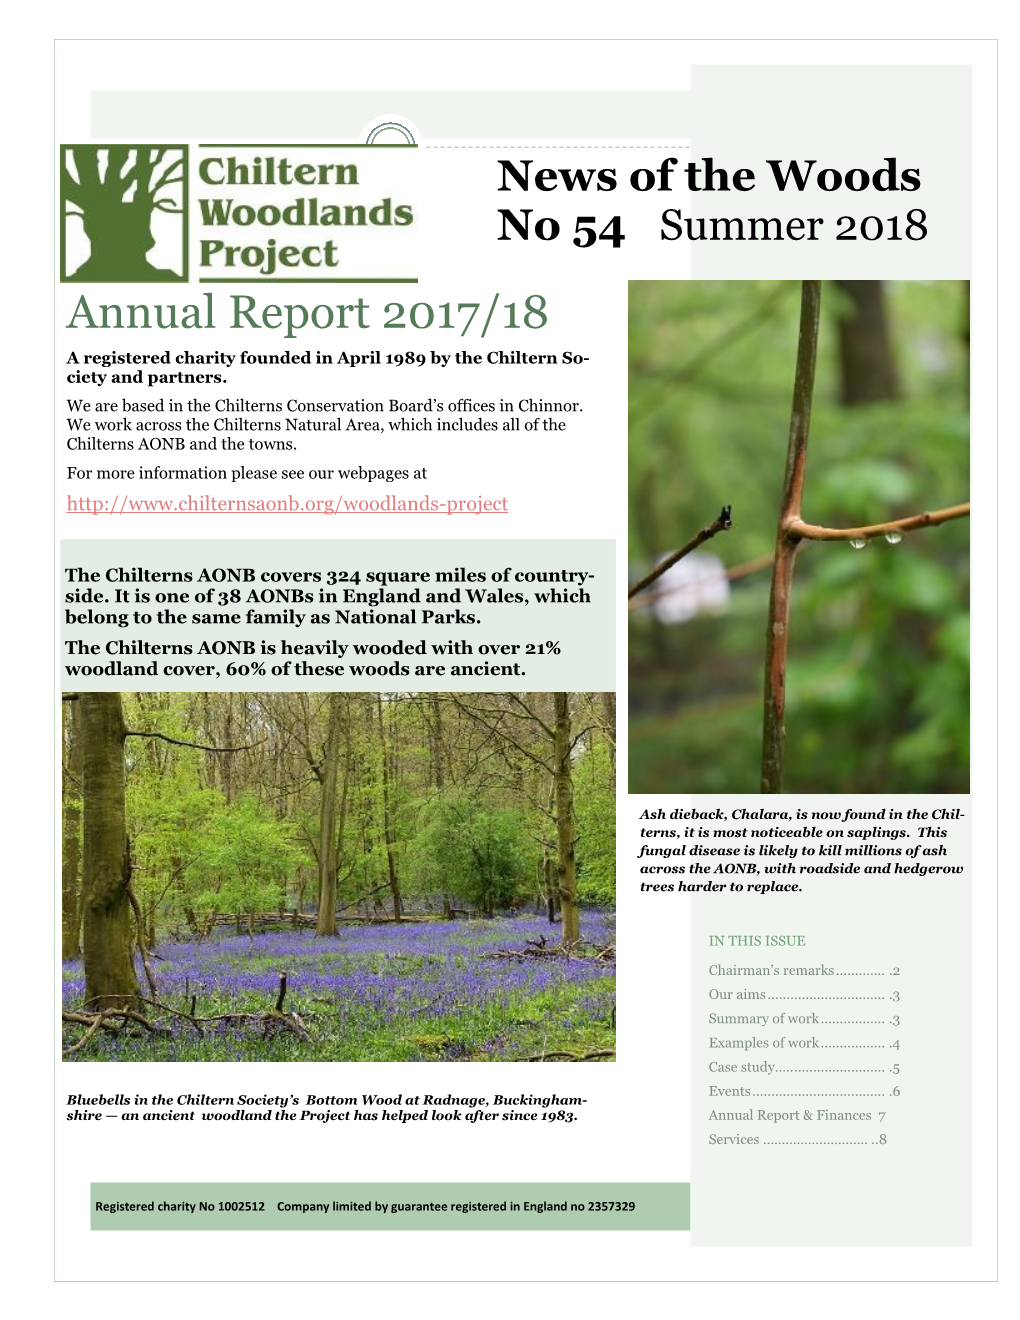 Annual Report 2017/18 a Registered Charity Founded in April 1989 by the Chiltern So- Ciety and Partners